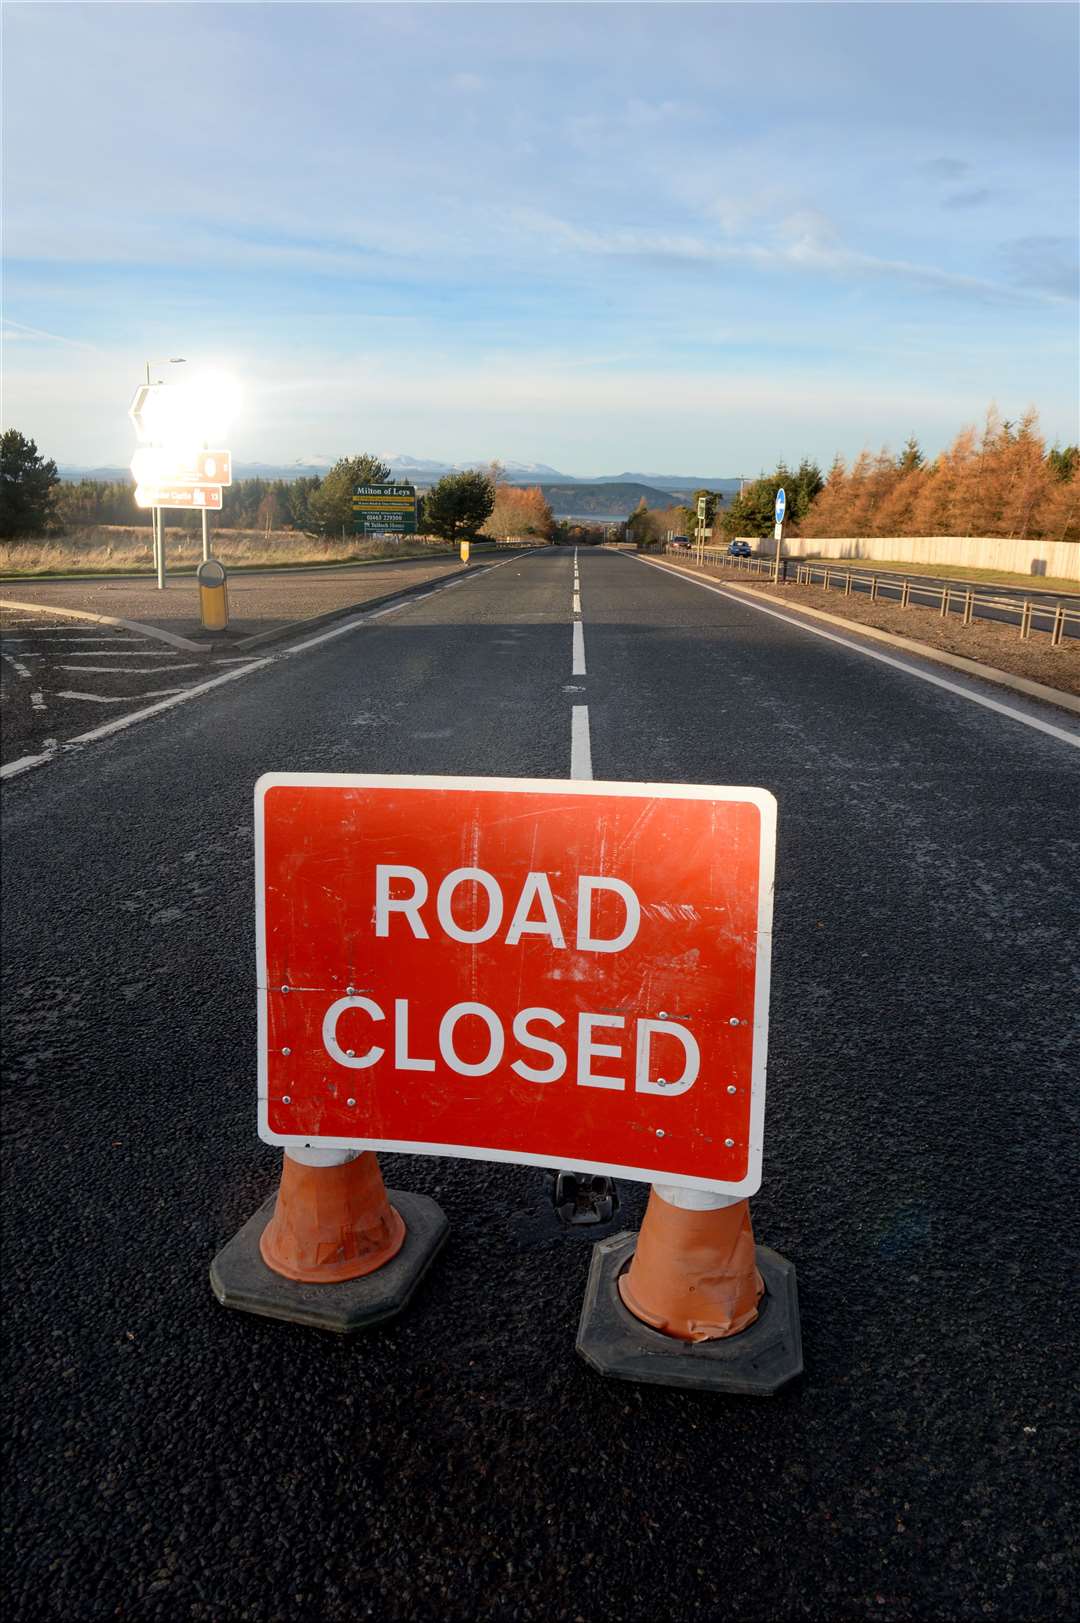 A9 will be closed for three consecutive nights.